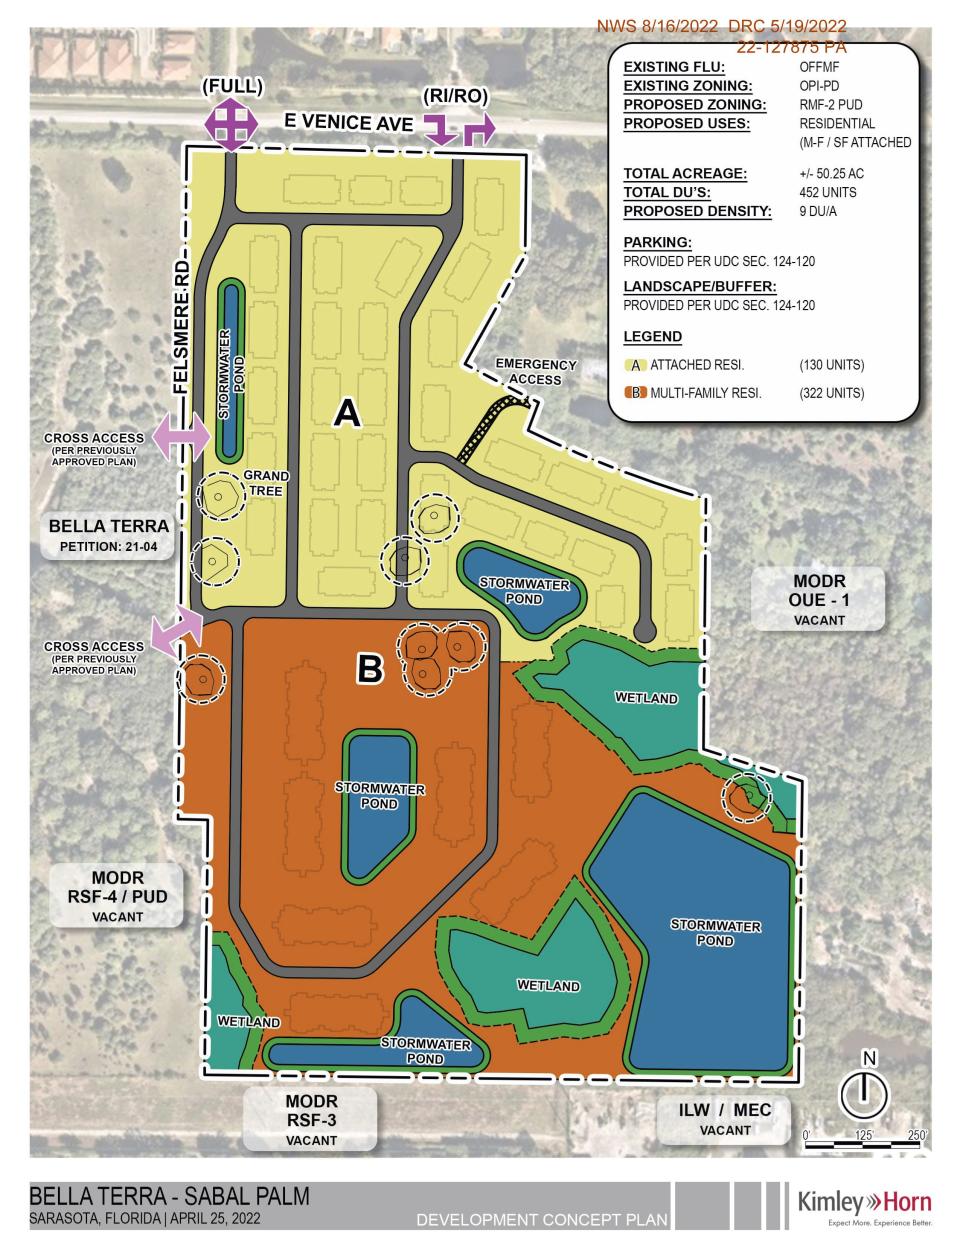 The development concept plan for Sabal Palm Preserve notes the general location of where single-family and multi-family homes may be located. However, it is a non-binding plan.